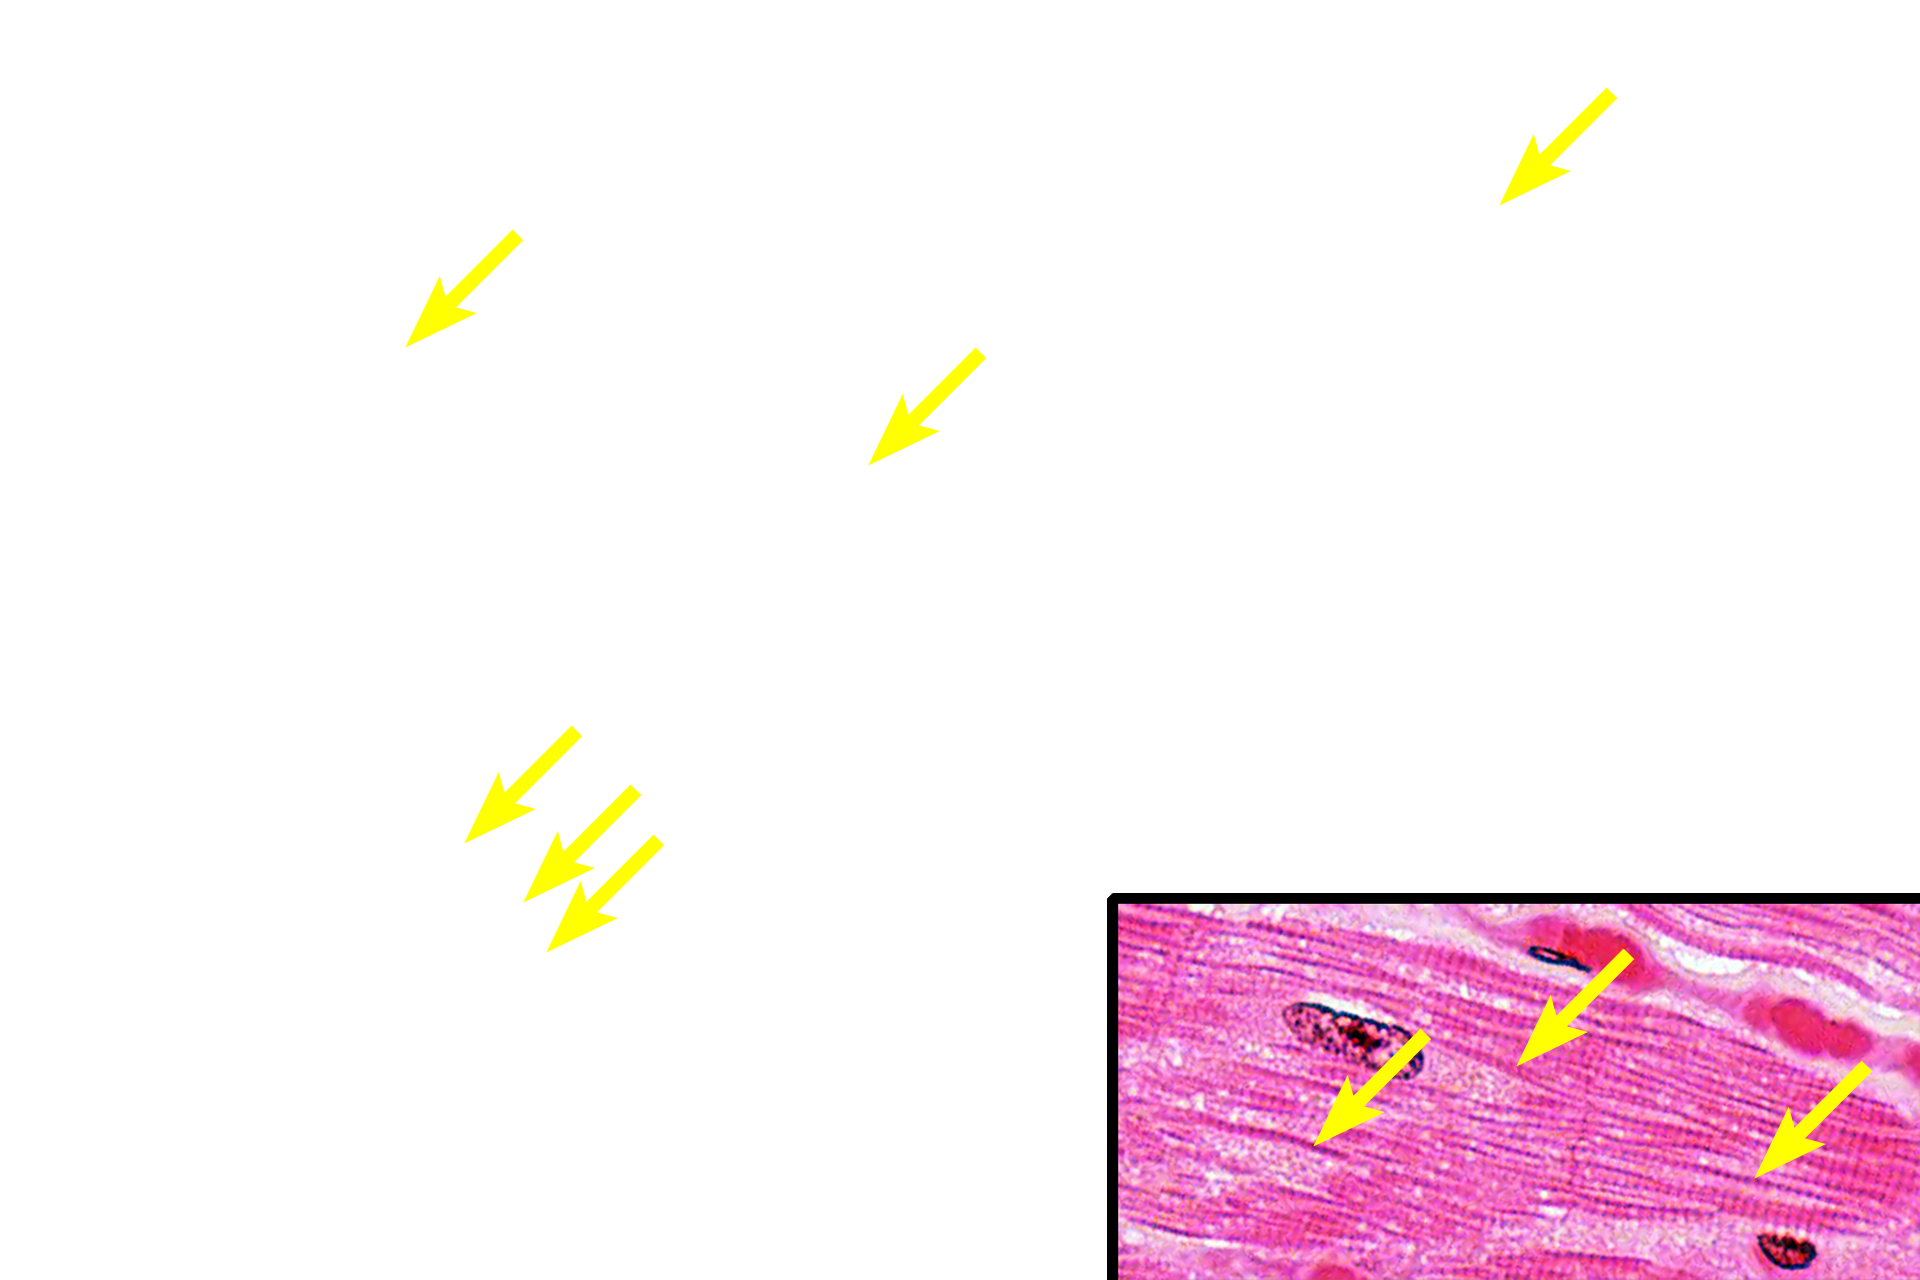 Myofibrils > <p>Cardiac muscle fibers have fewer myofibrils compared with skeletal muscle fibers and thus their spacing allows them to be seen individually. The striations are evident along the length of each myofibril. Inset, 1000x</p>
